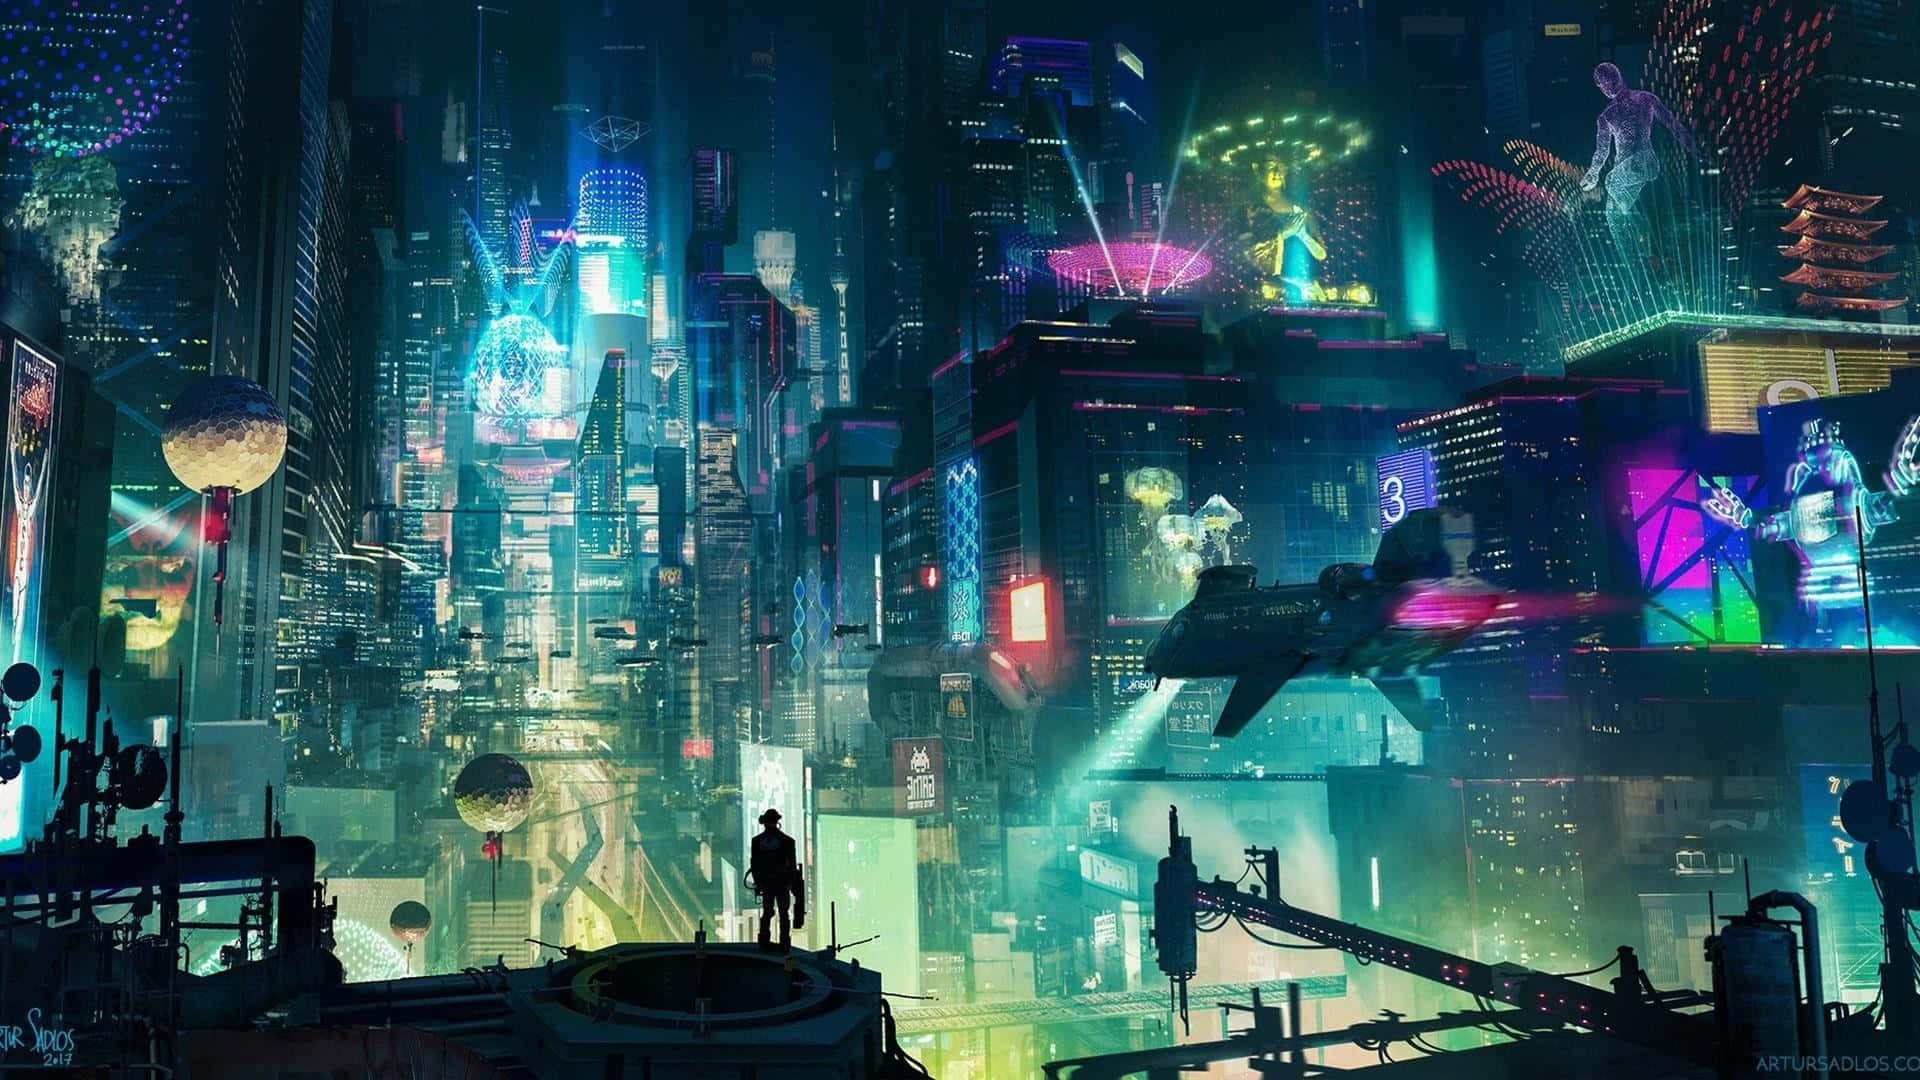 Download Cyberpunk Night City With Floating Spaceship Wallpaper